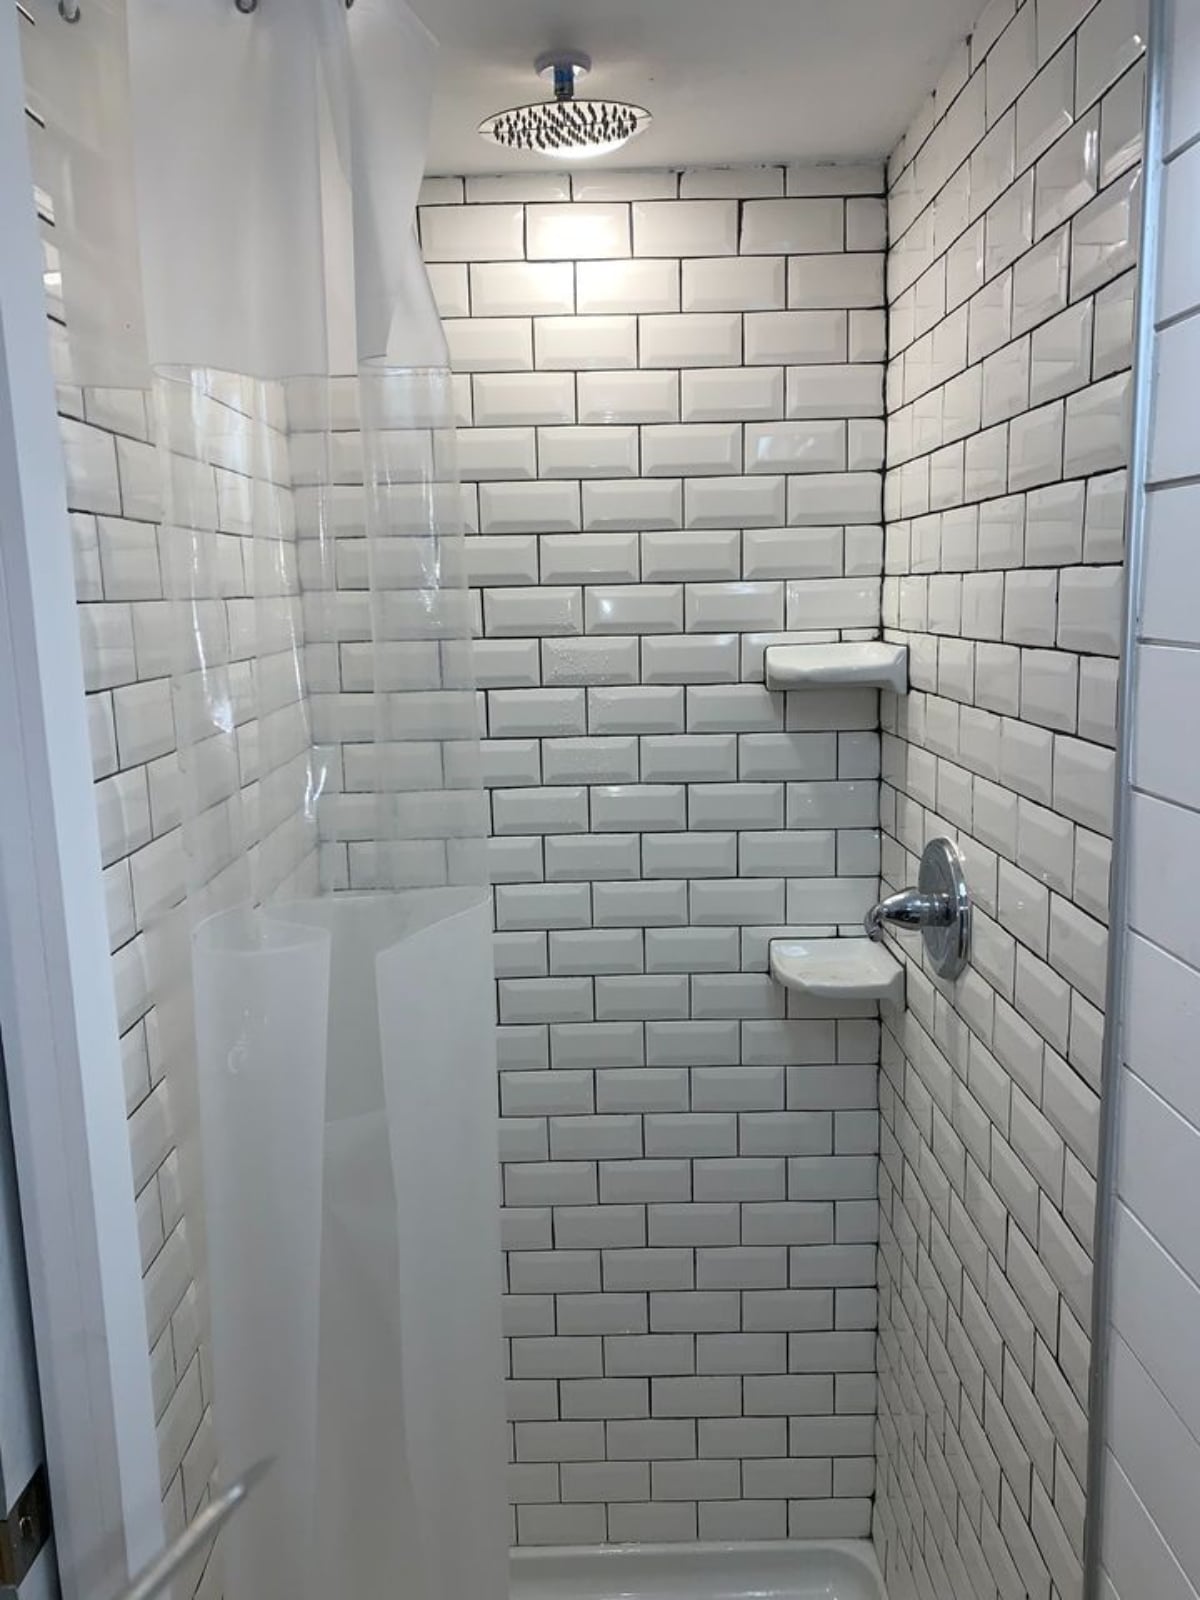 Shower area of 24' Tiny House